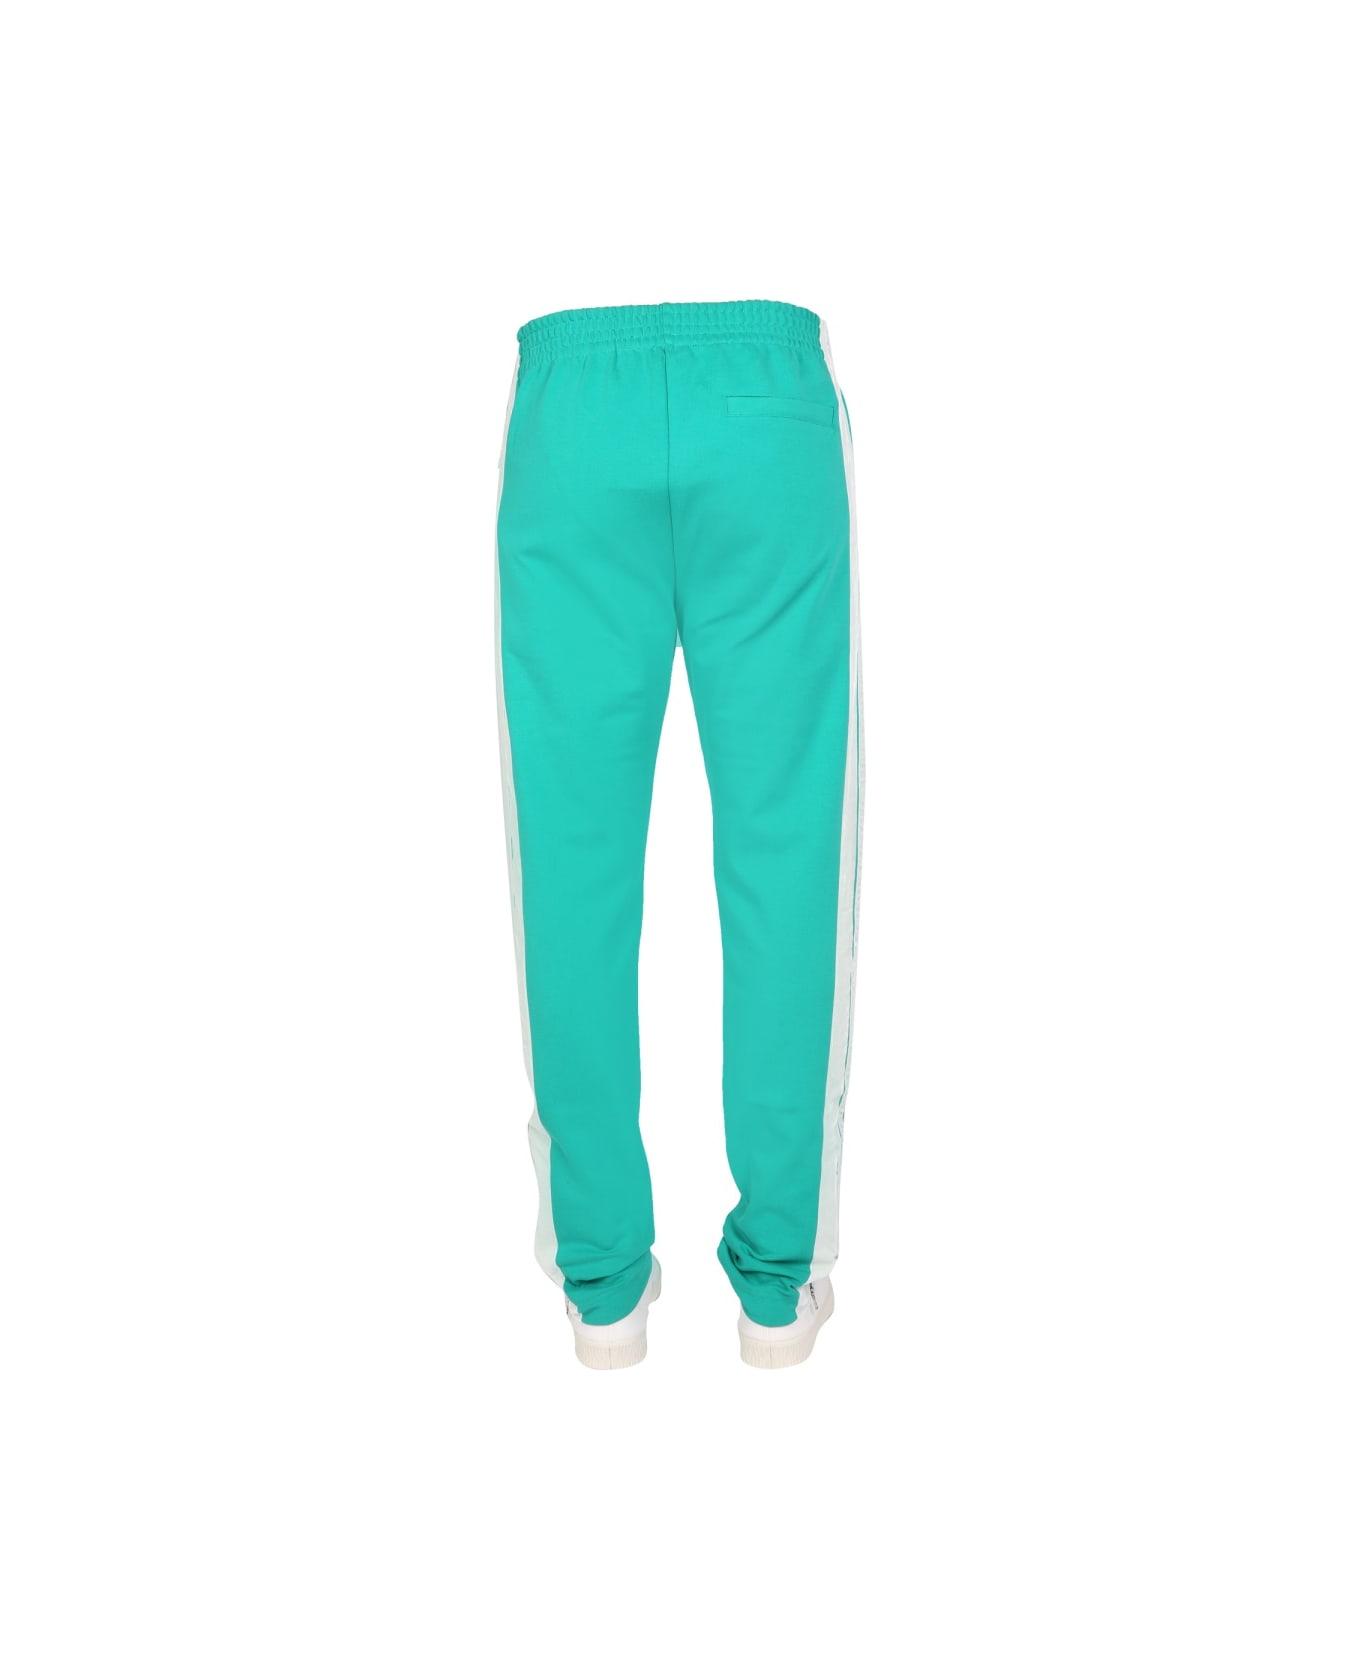 Mouty Logo Embroidery Jogging Pants - GREEN